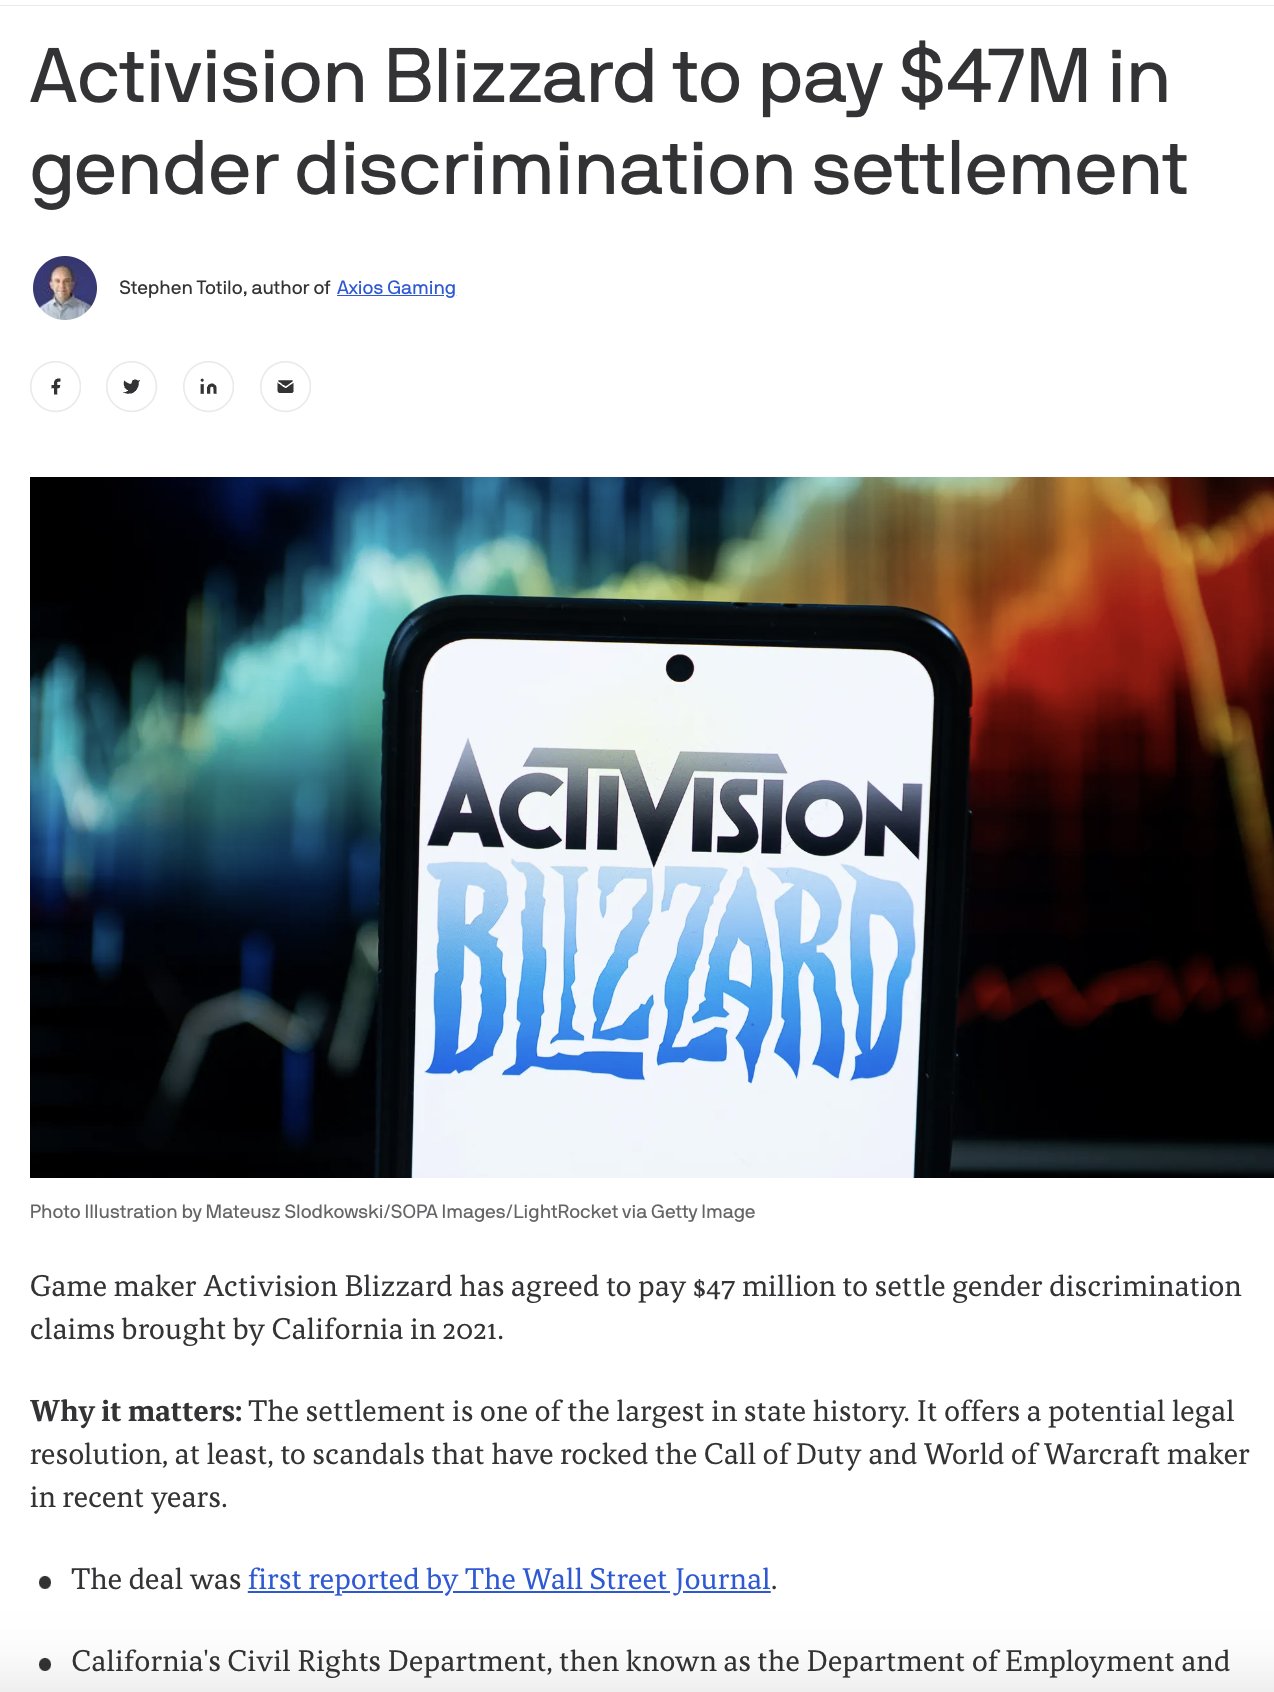 500,000 Activision accounts have been leaked